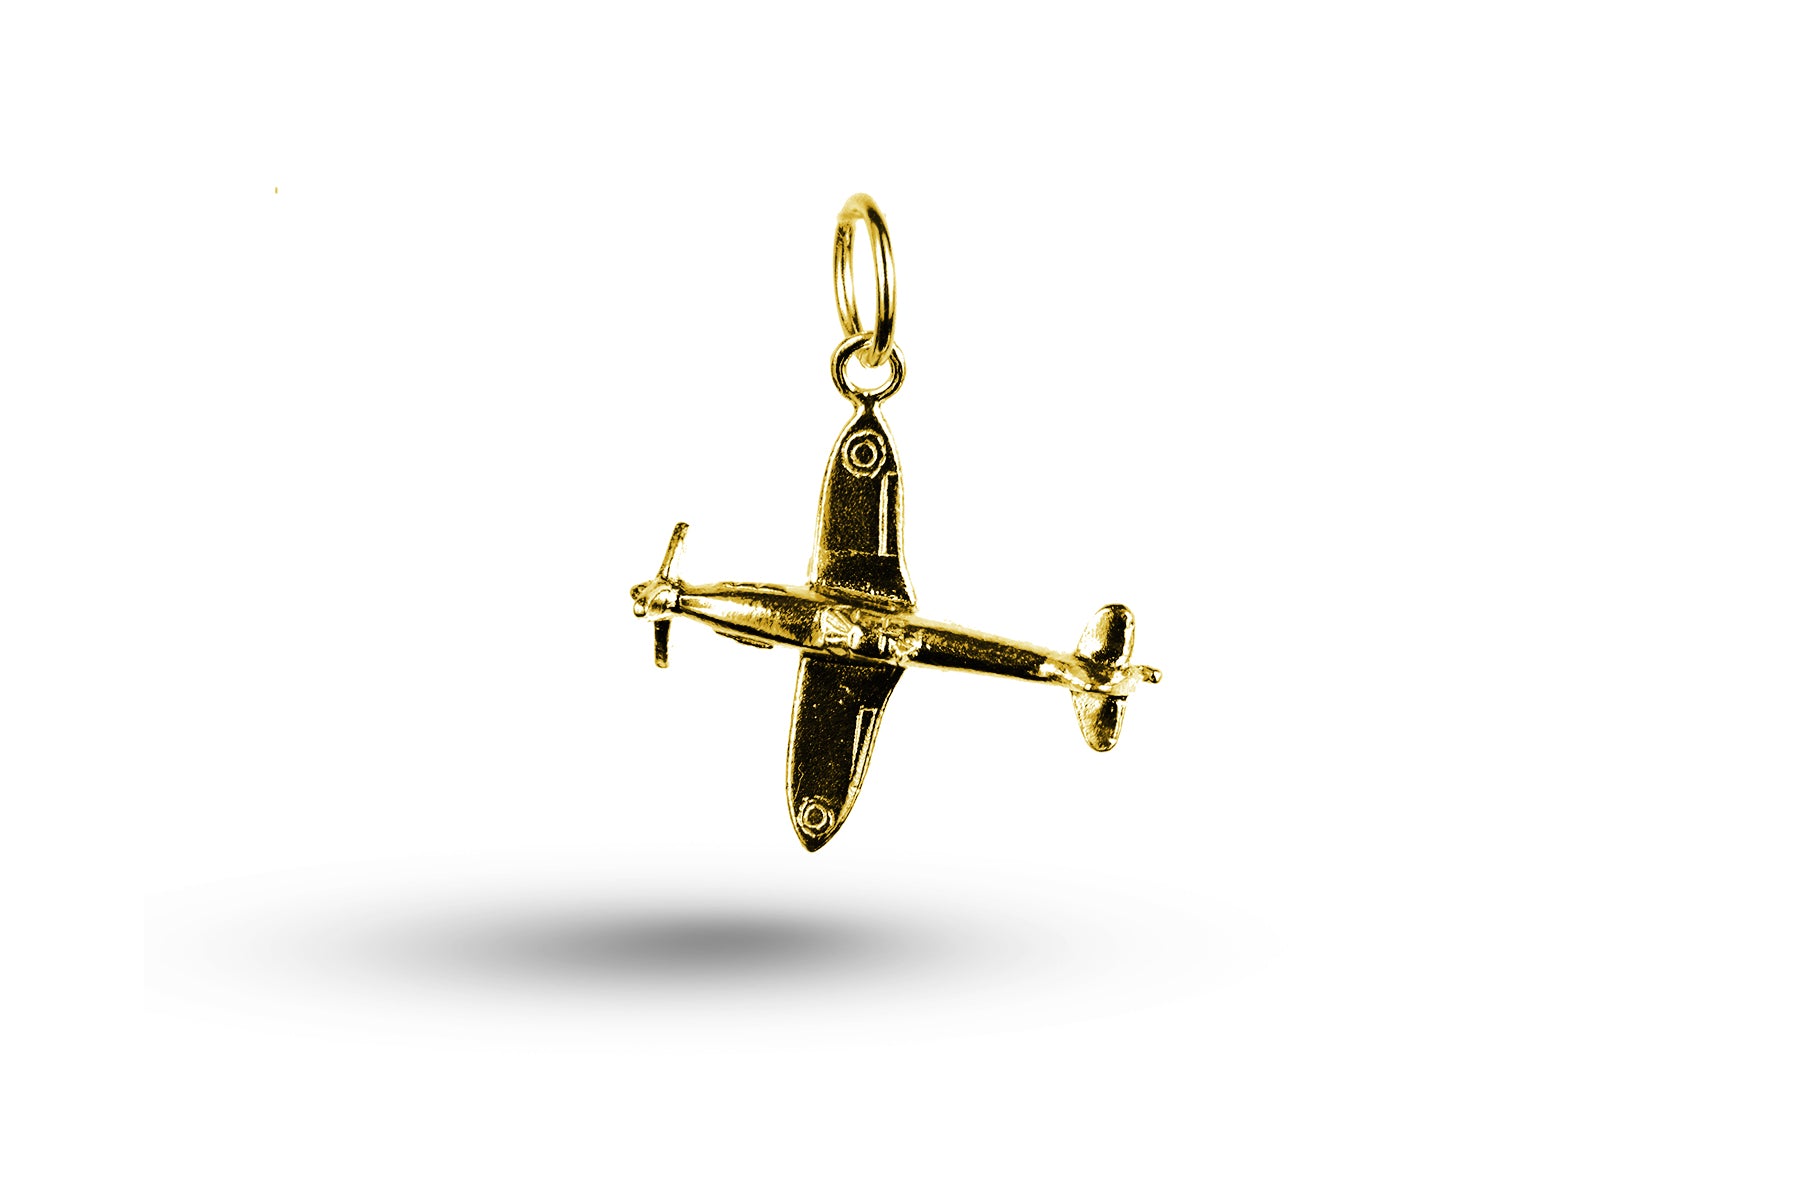 Yellow gold Spitfire charm.